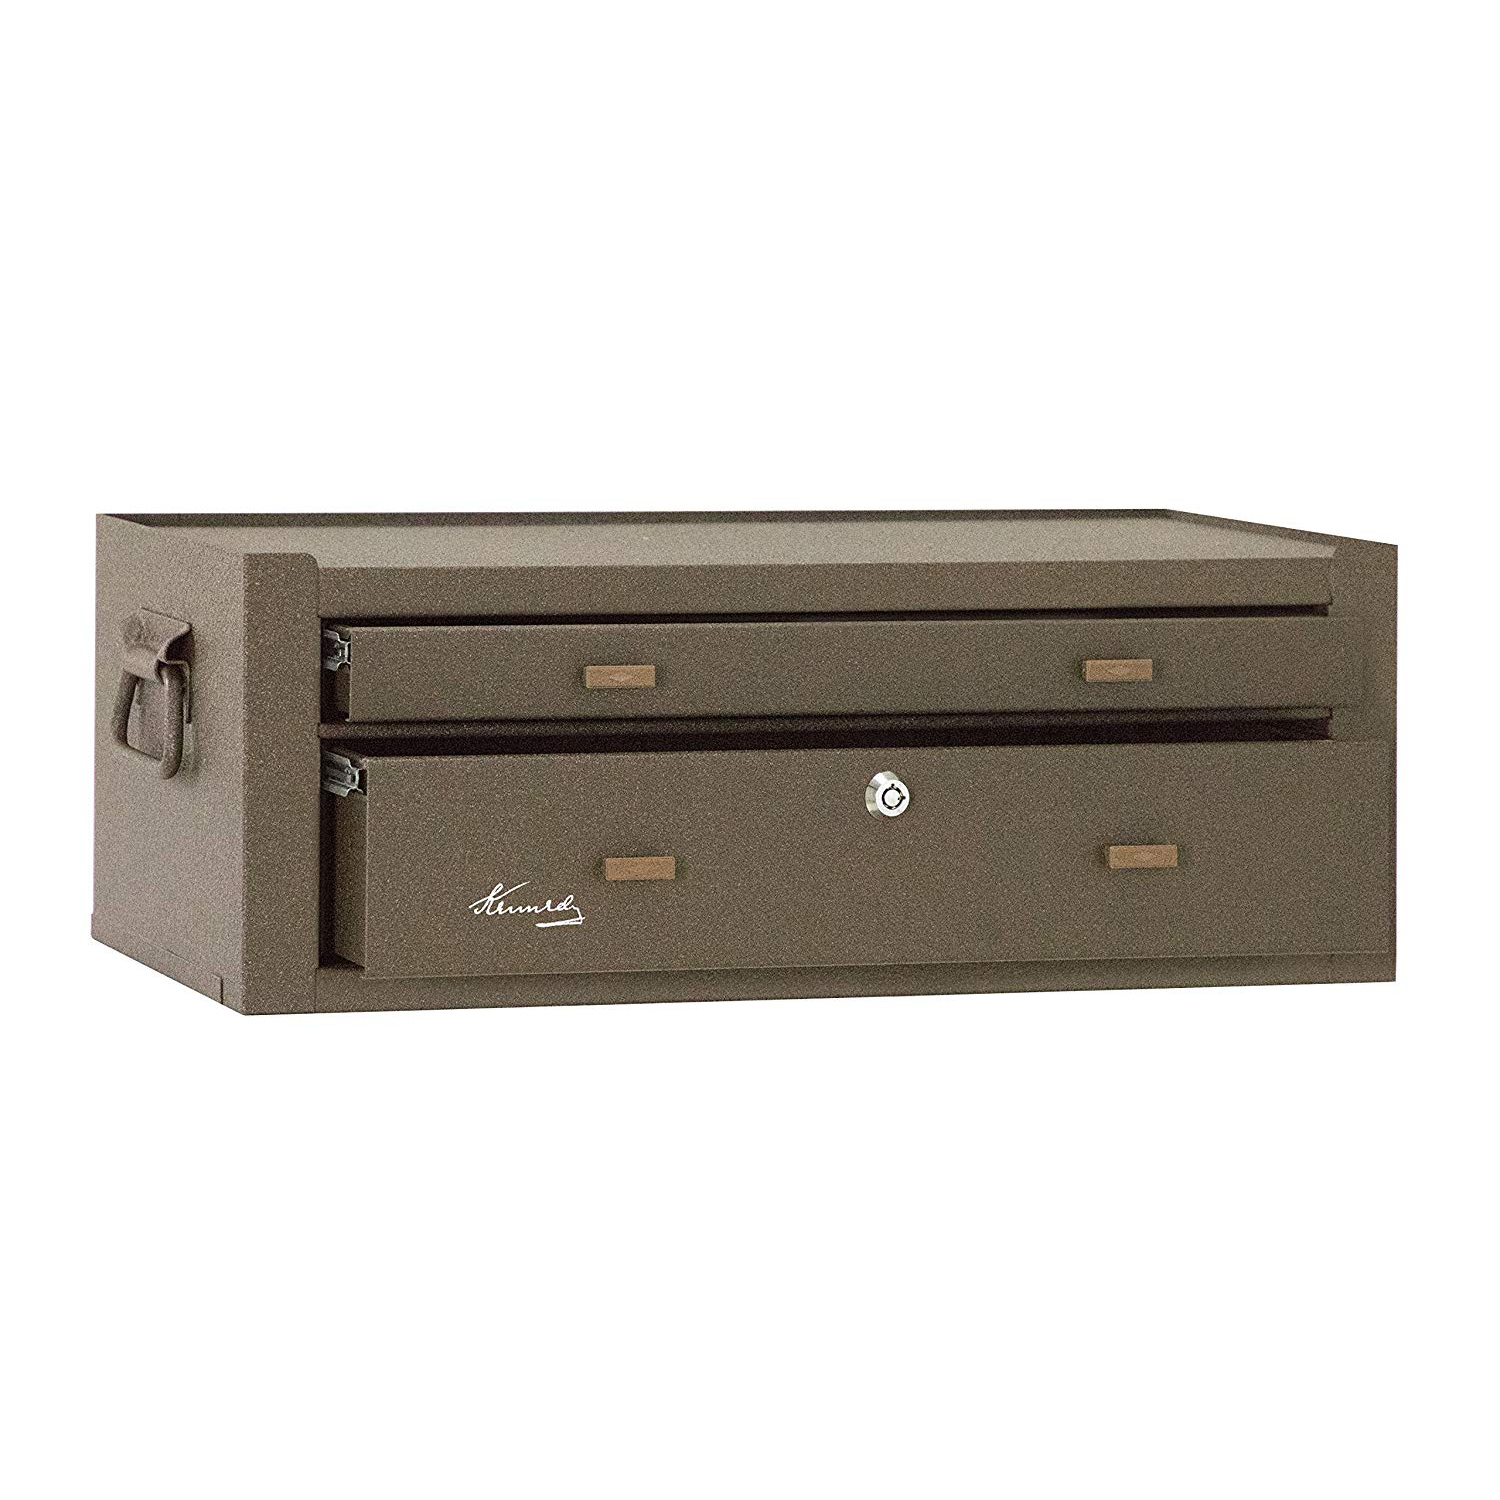 MACHINIST CHEST 21in MC22B BASE 2-DRAWER BROWN WRINKLE